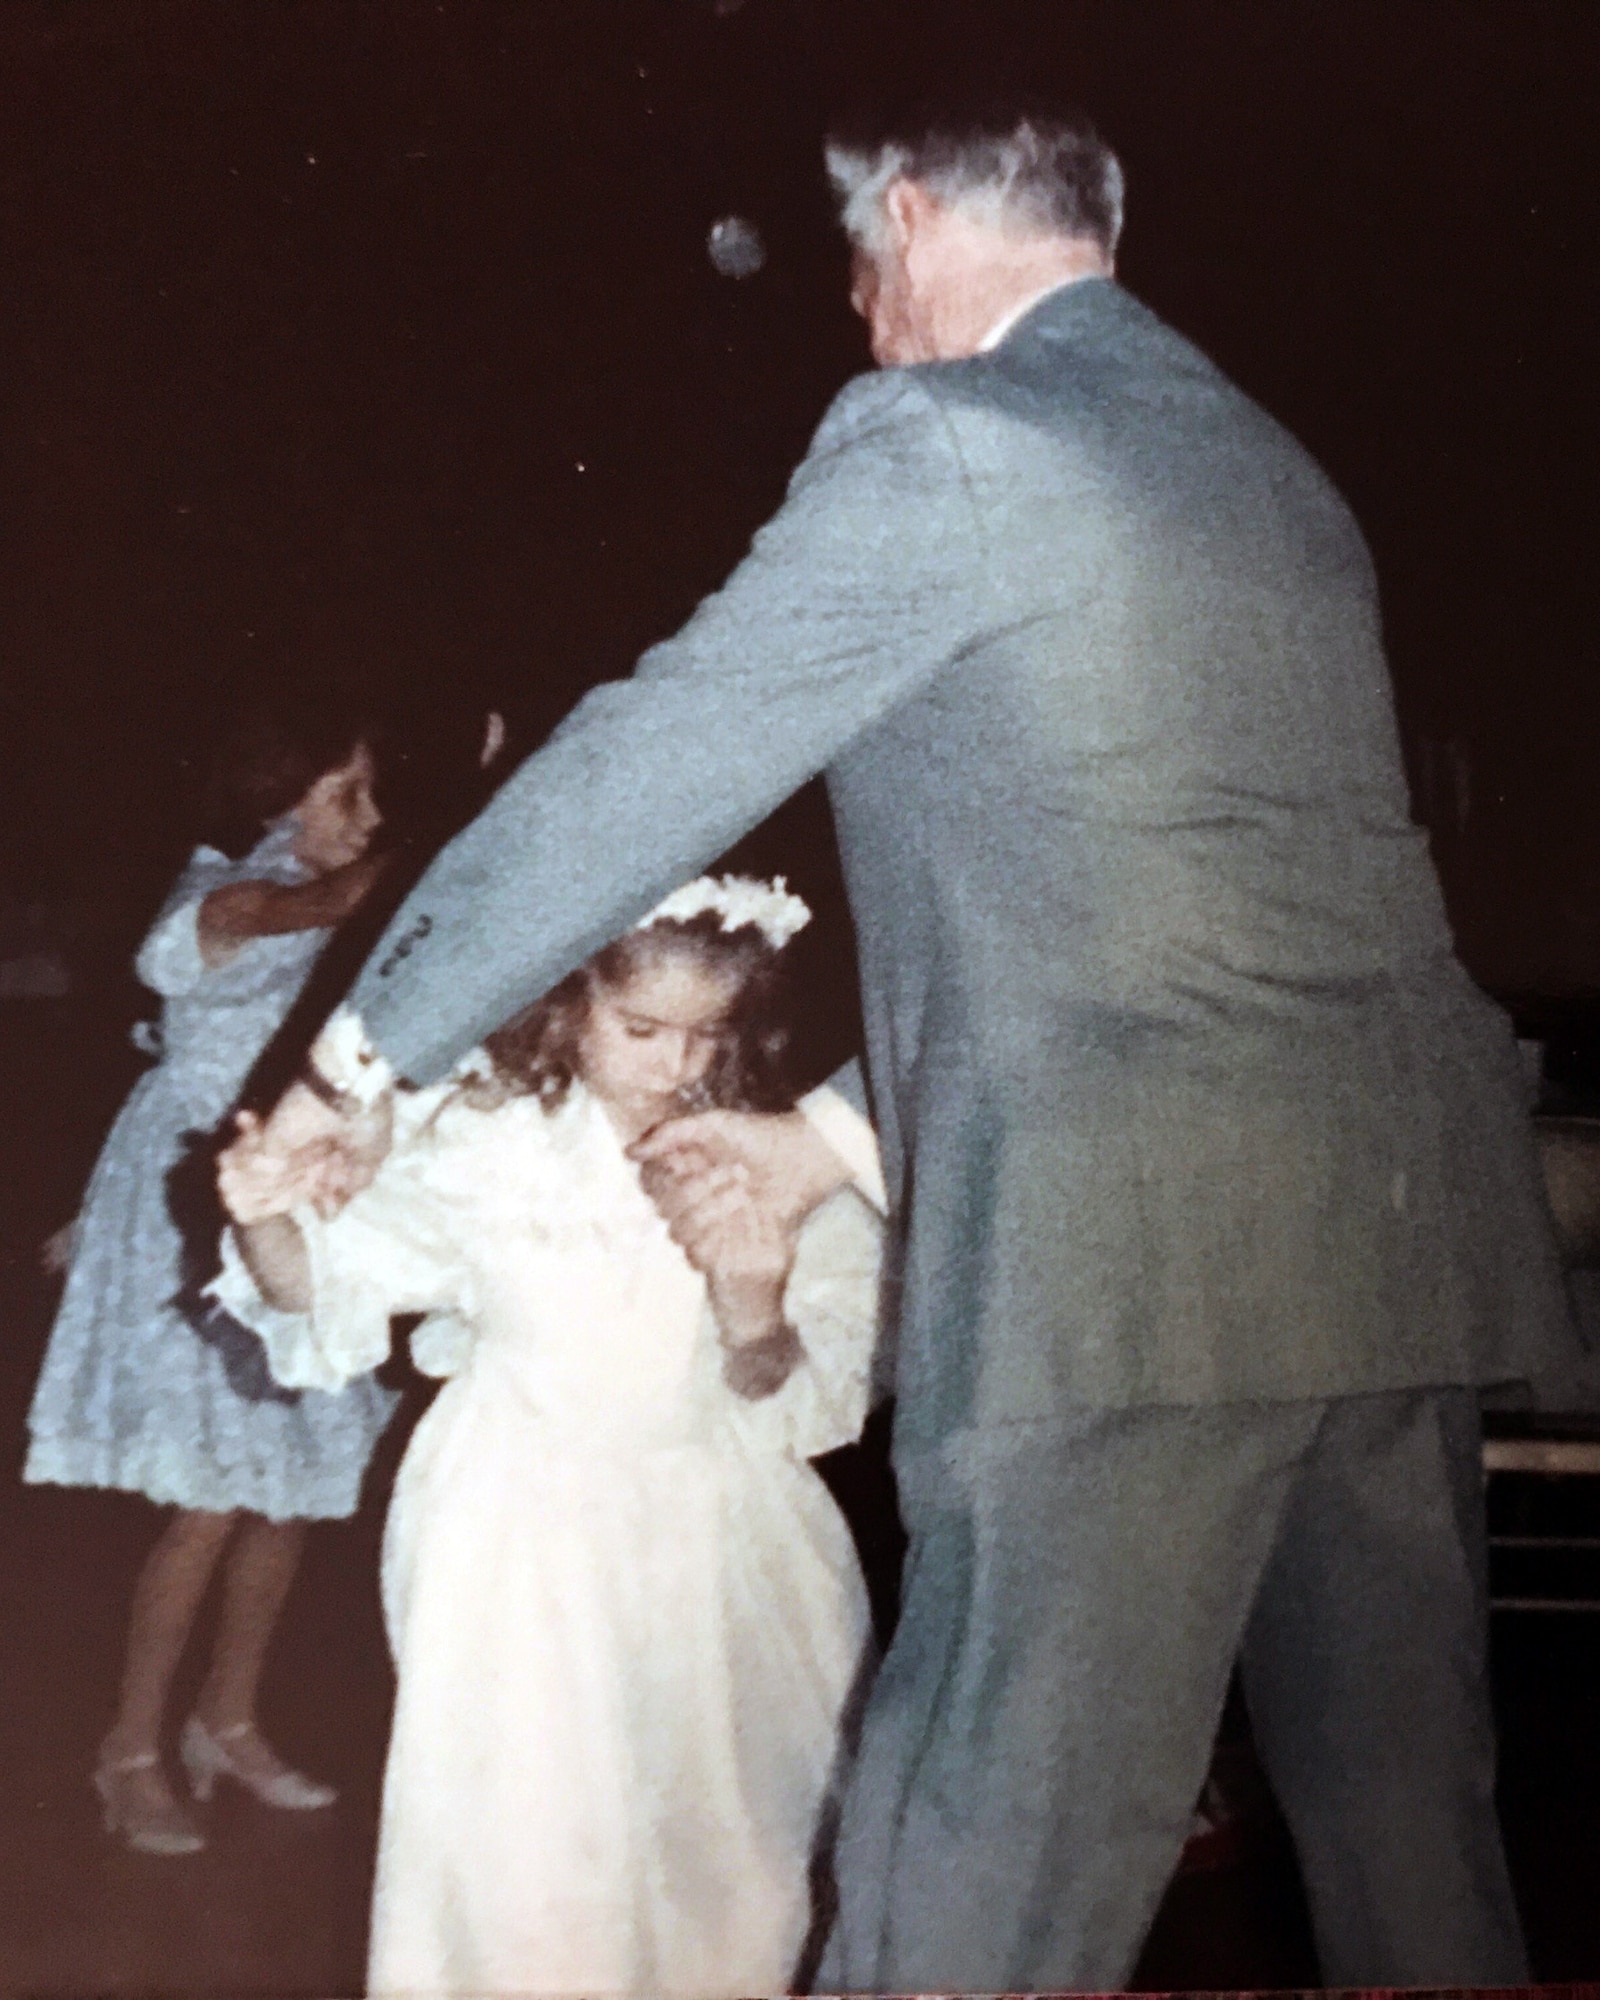 Amber Schoenberger, now a lieutenant in the Air Force Reserve, dances on her granddaddy's feet nearly 30 years ago. U.S. Army Air Forces Cpl Willard Edwin Howard (1921-2009) was a survivor of the 1942 Bataan Death March, and Schoenberger completed a memorial marathon March 19 at White Sands Missile Range, NM, in his honor. (Courtesy photo)